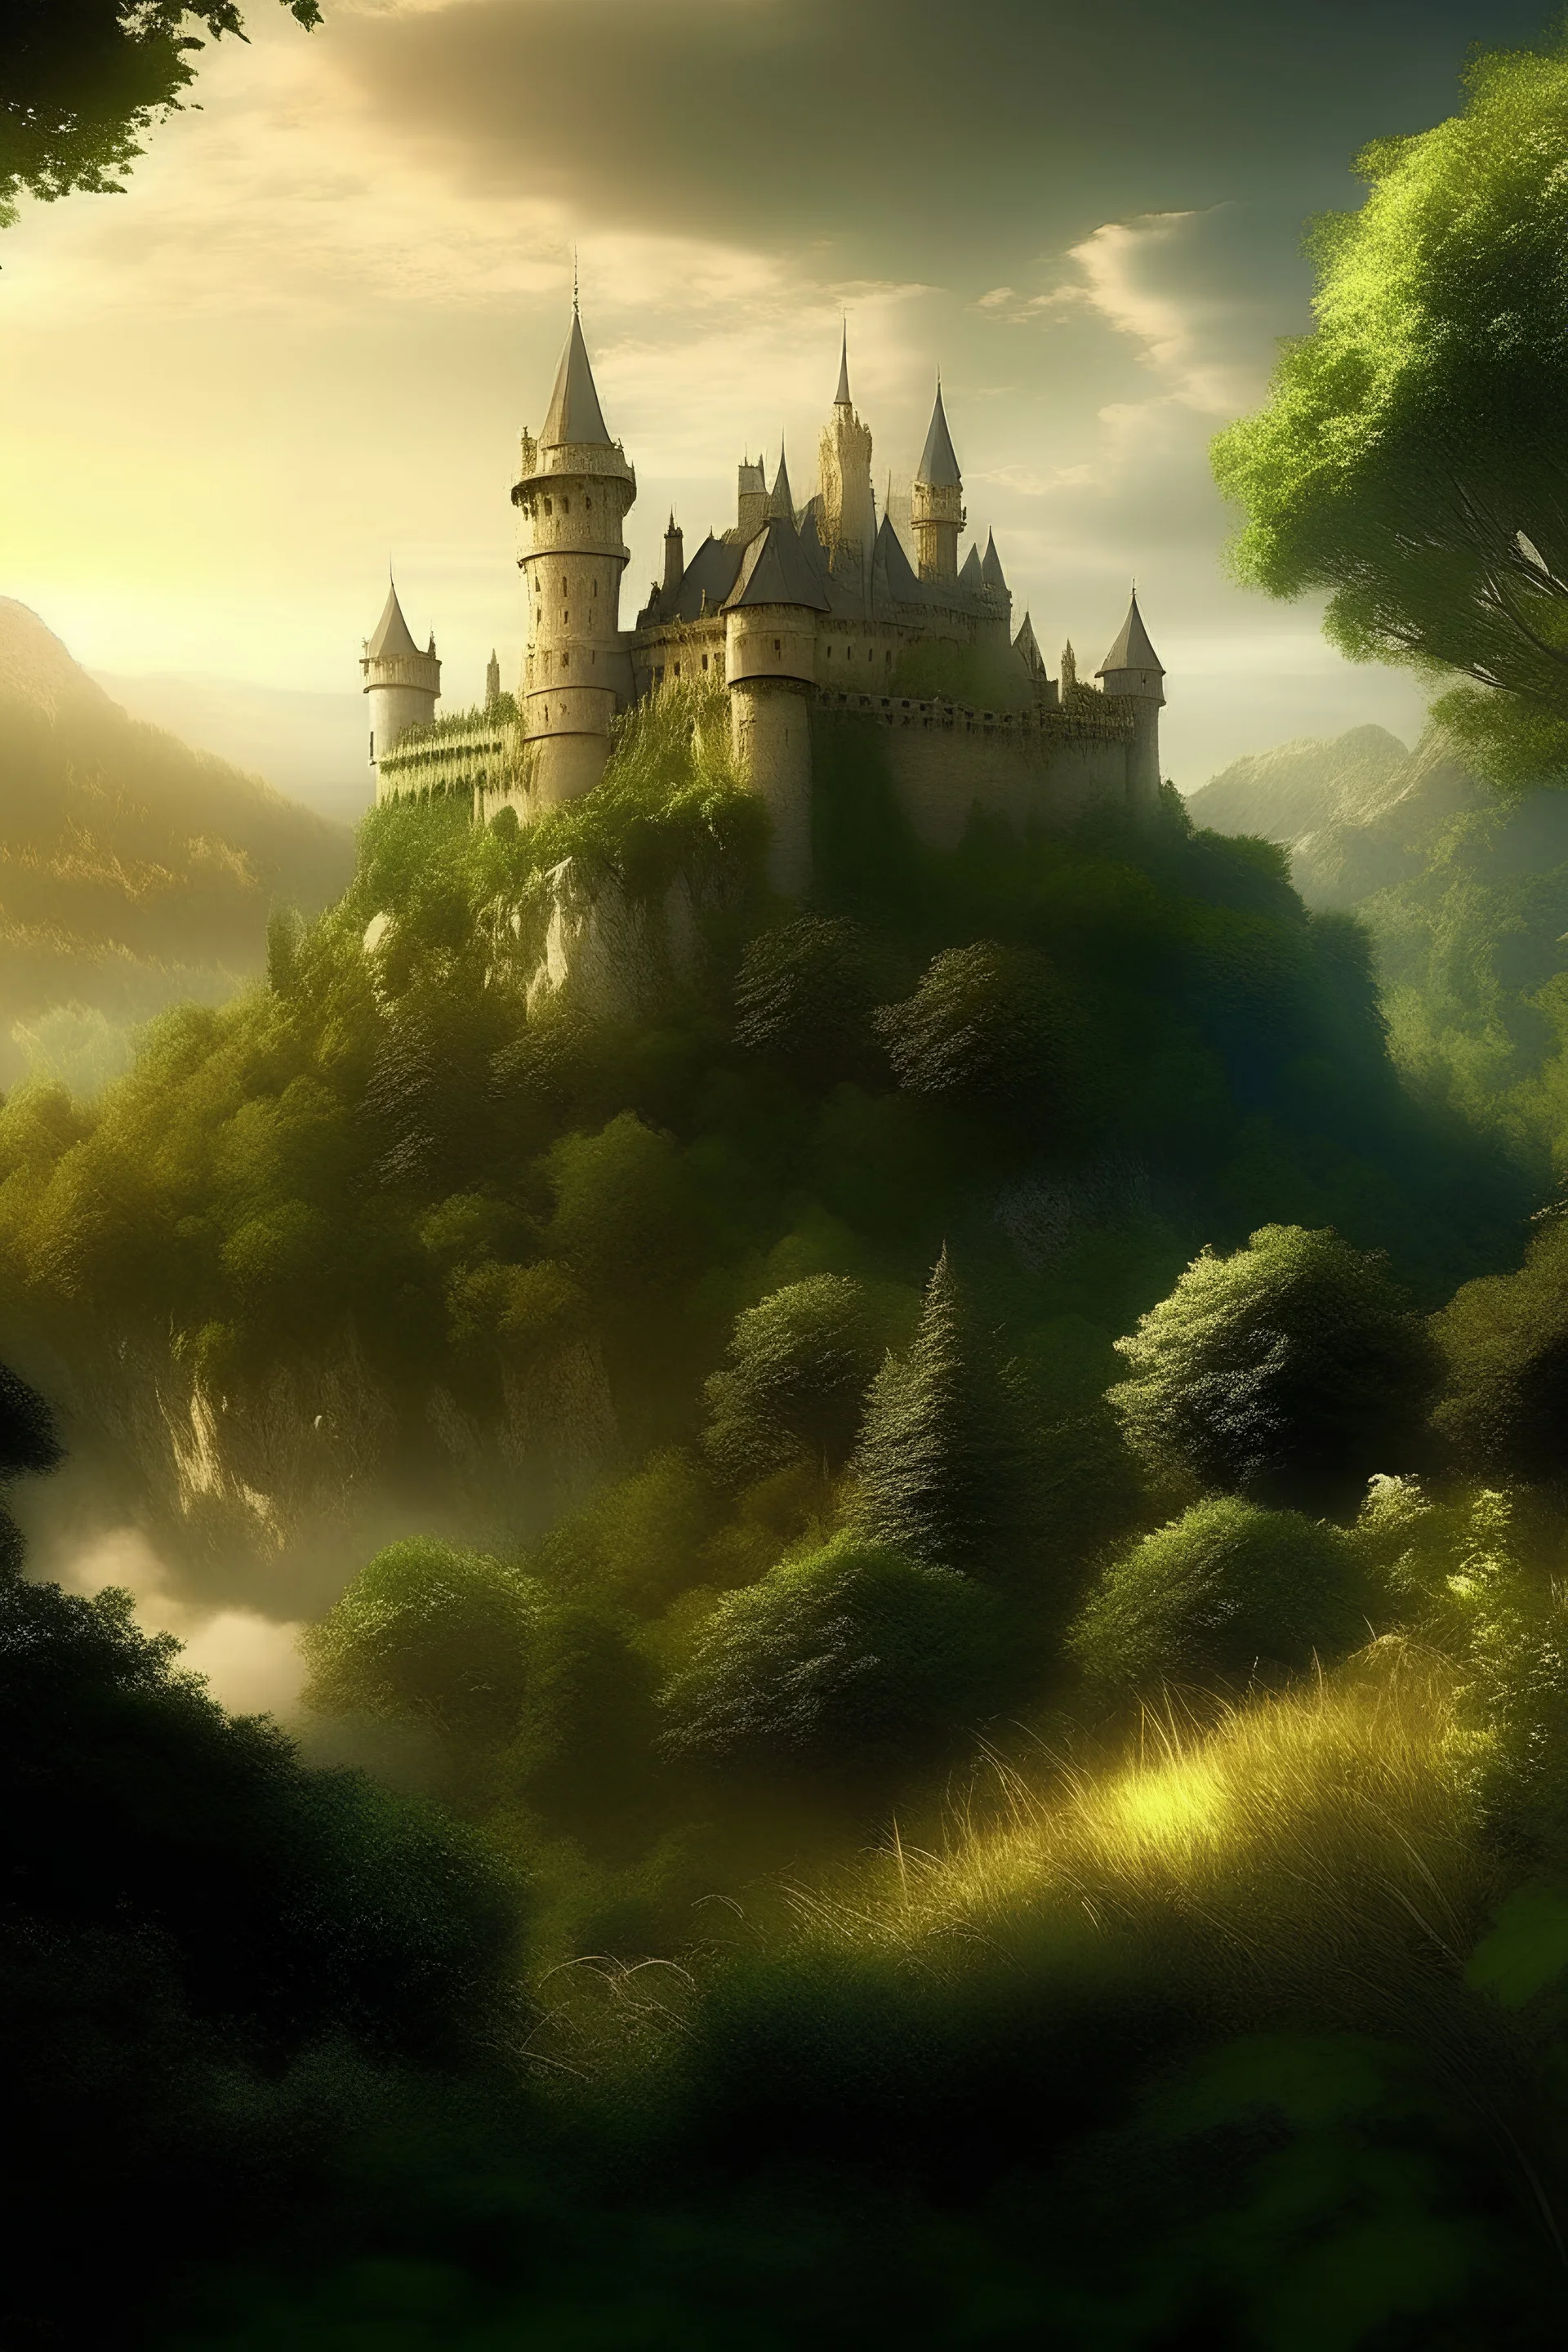 solstice summer In an ancient kingdom, a magnificent castle stood atop lush mountains. . Legend had it that this castle concealed a mysterious treasure, solstice summer